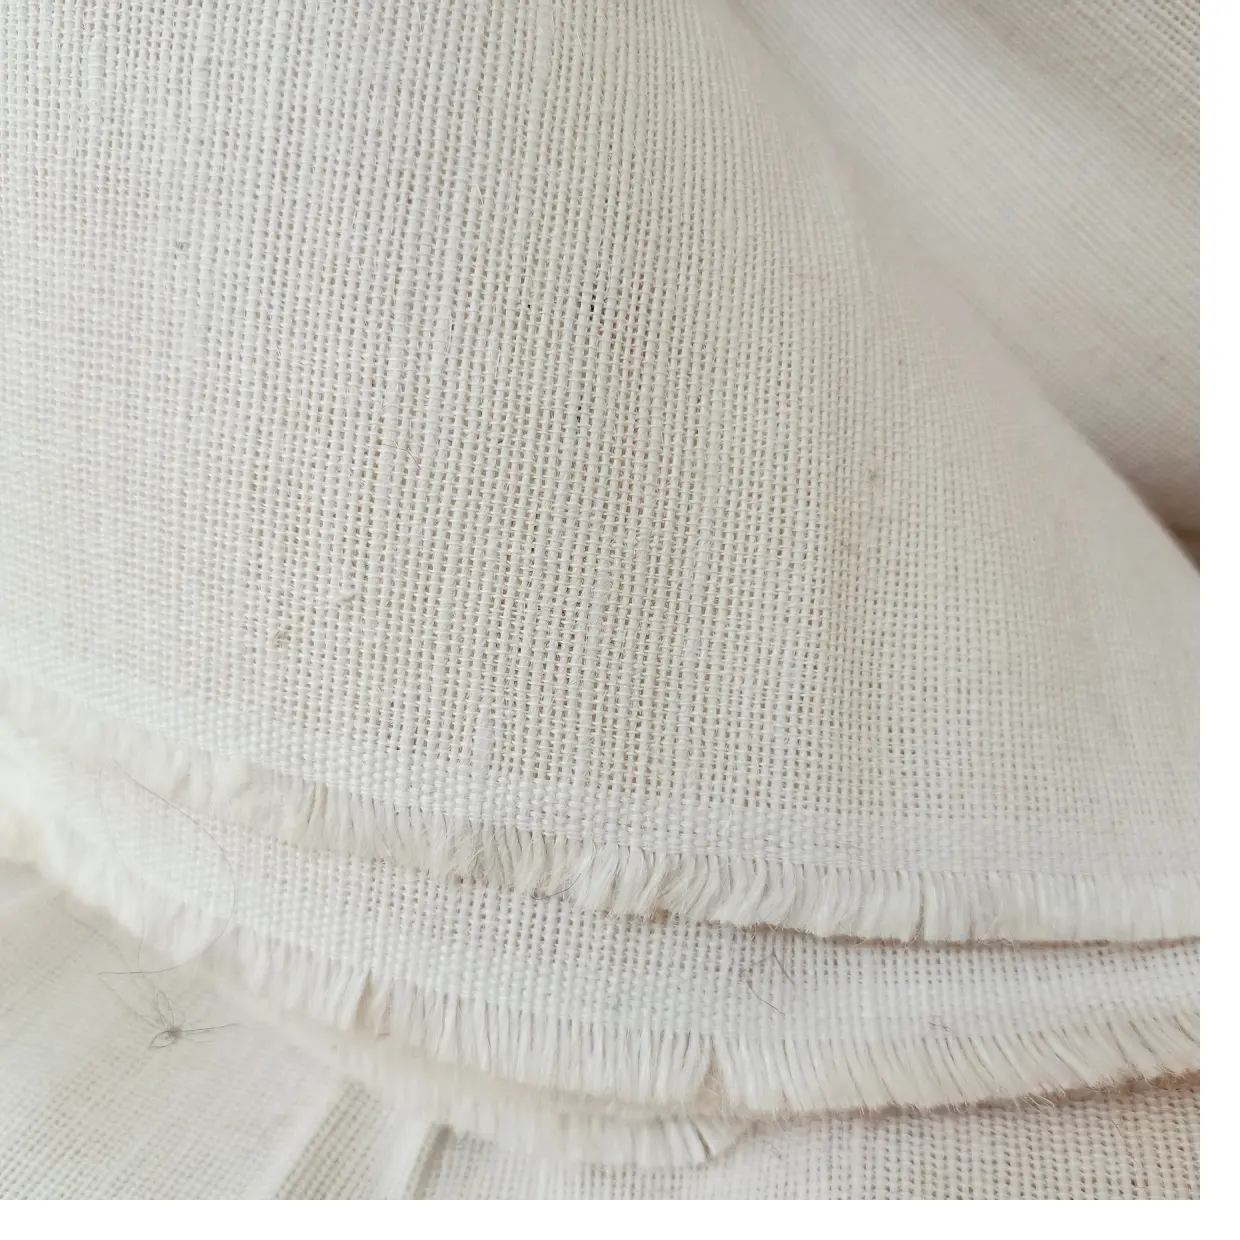 natural pure white pineapple fiber fabric made from real pineapple fibers ideal for clothing designers and home furnishing